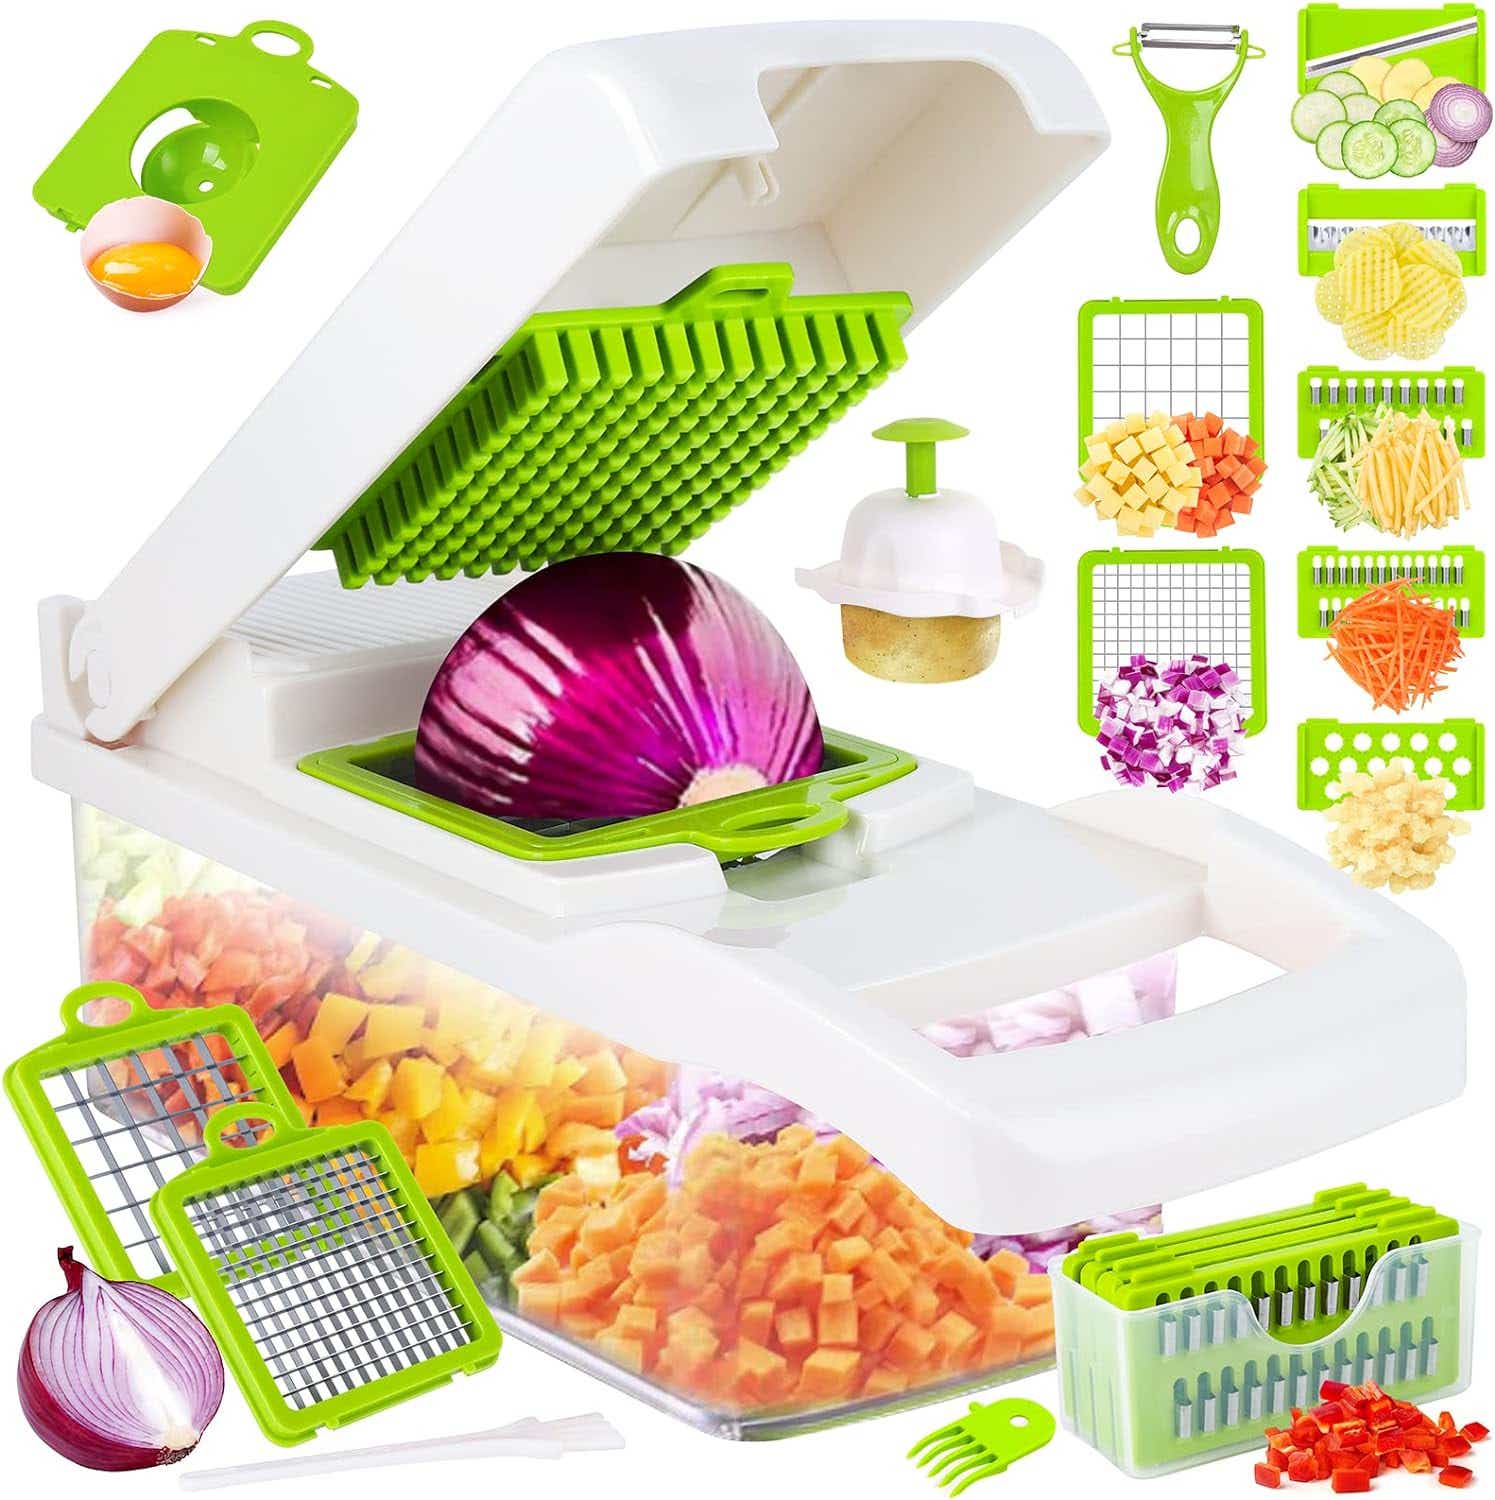 Vegetable Chopper, Pro Onion Chopper, 14 in 1Multifunctional Food Chopper, Vegetable Slicer Dicer Cutter,Veggie Chopper With 8 Blades,Carrot and Garlic...